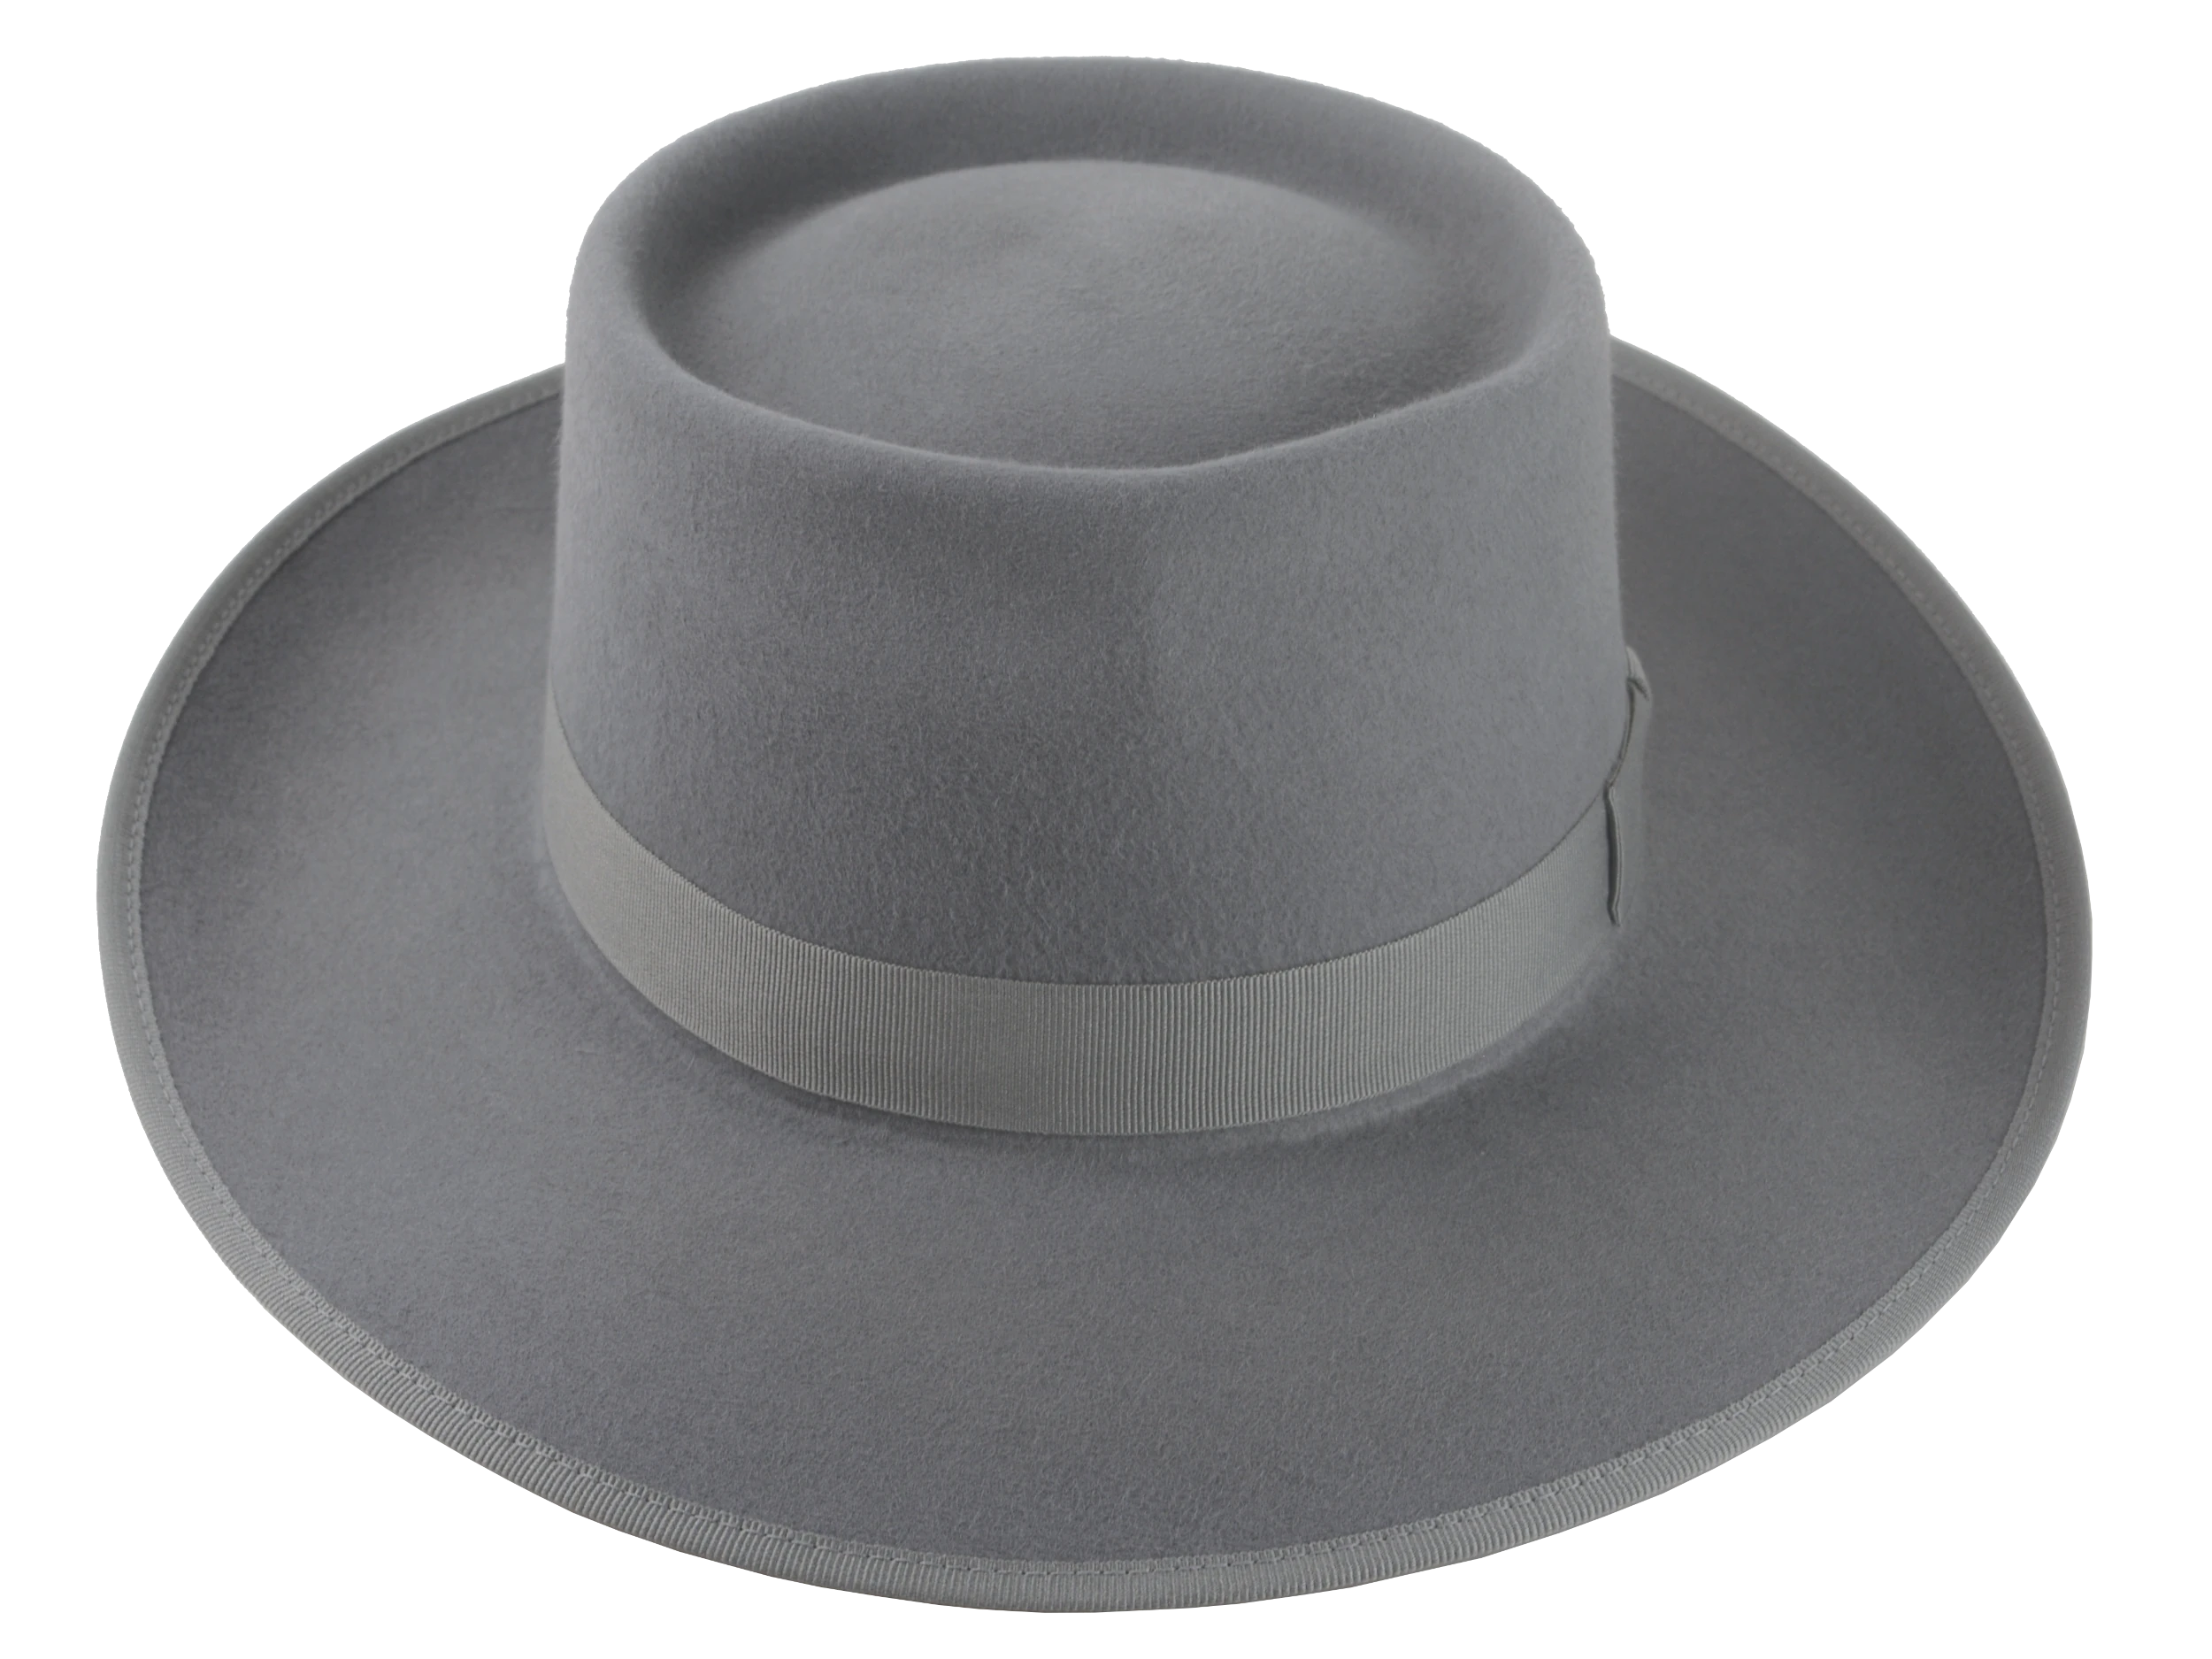 A frontal perspective of the Oppenheimer, emphasizing its pinch front crown design  | Agnoulita Hats